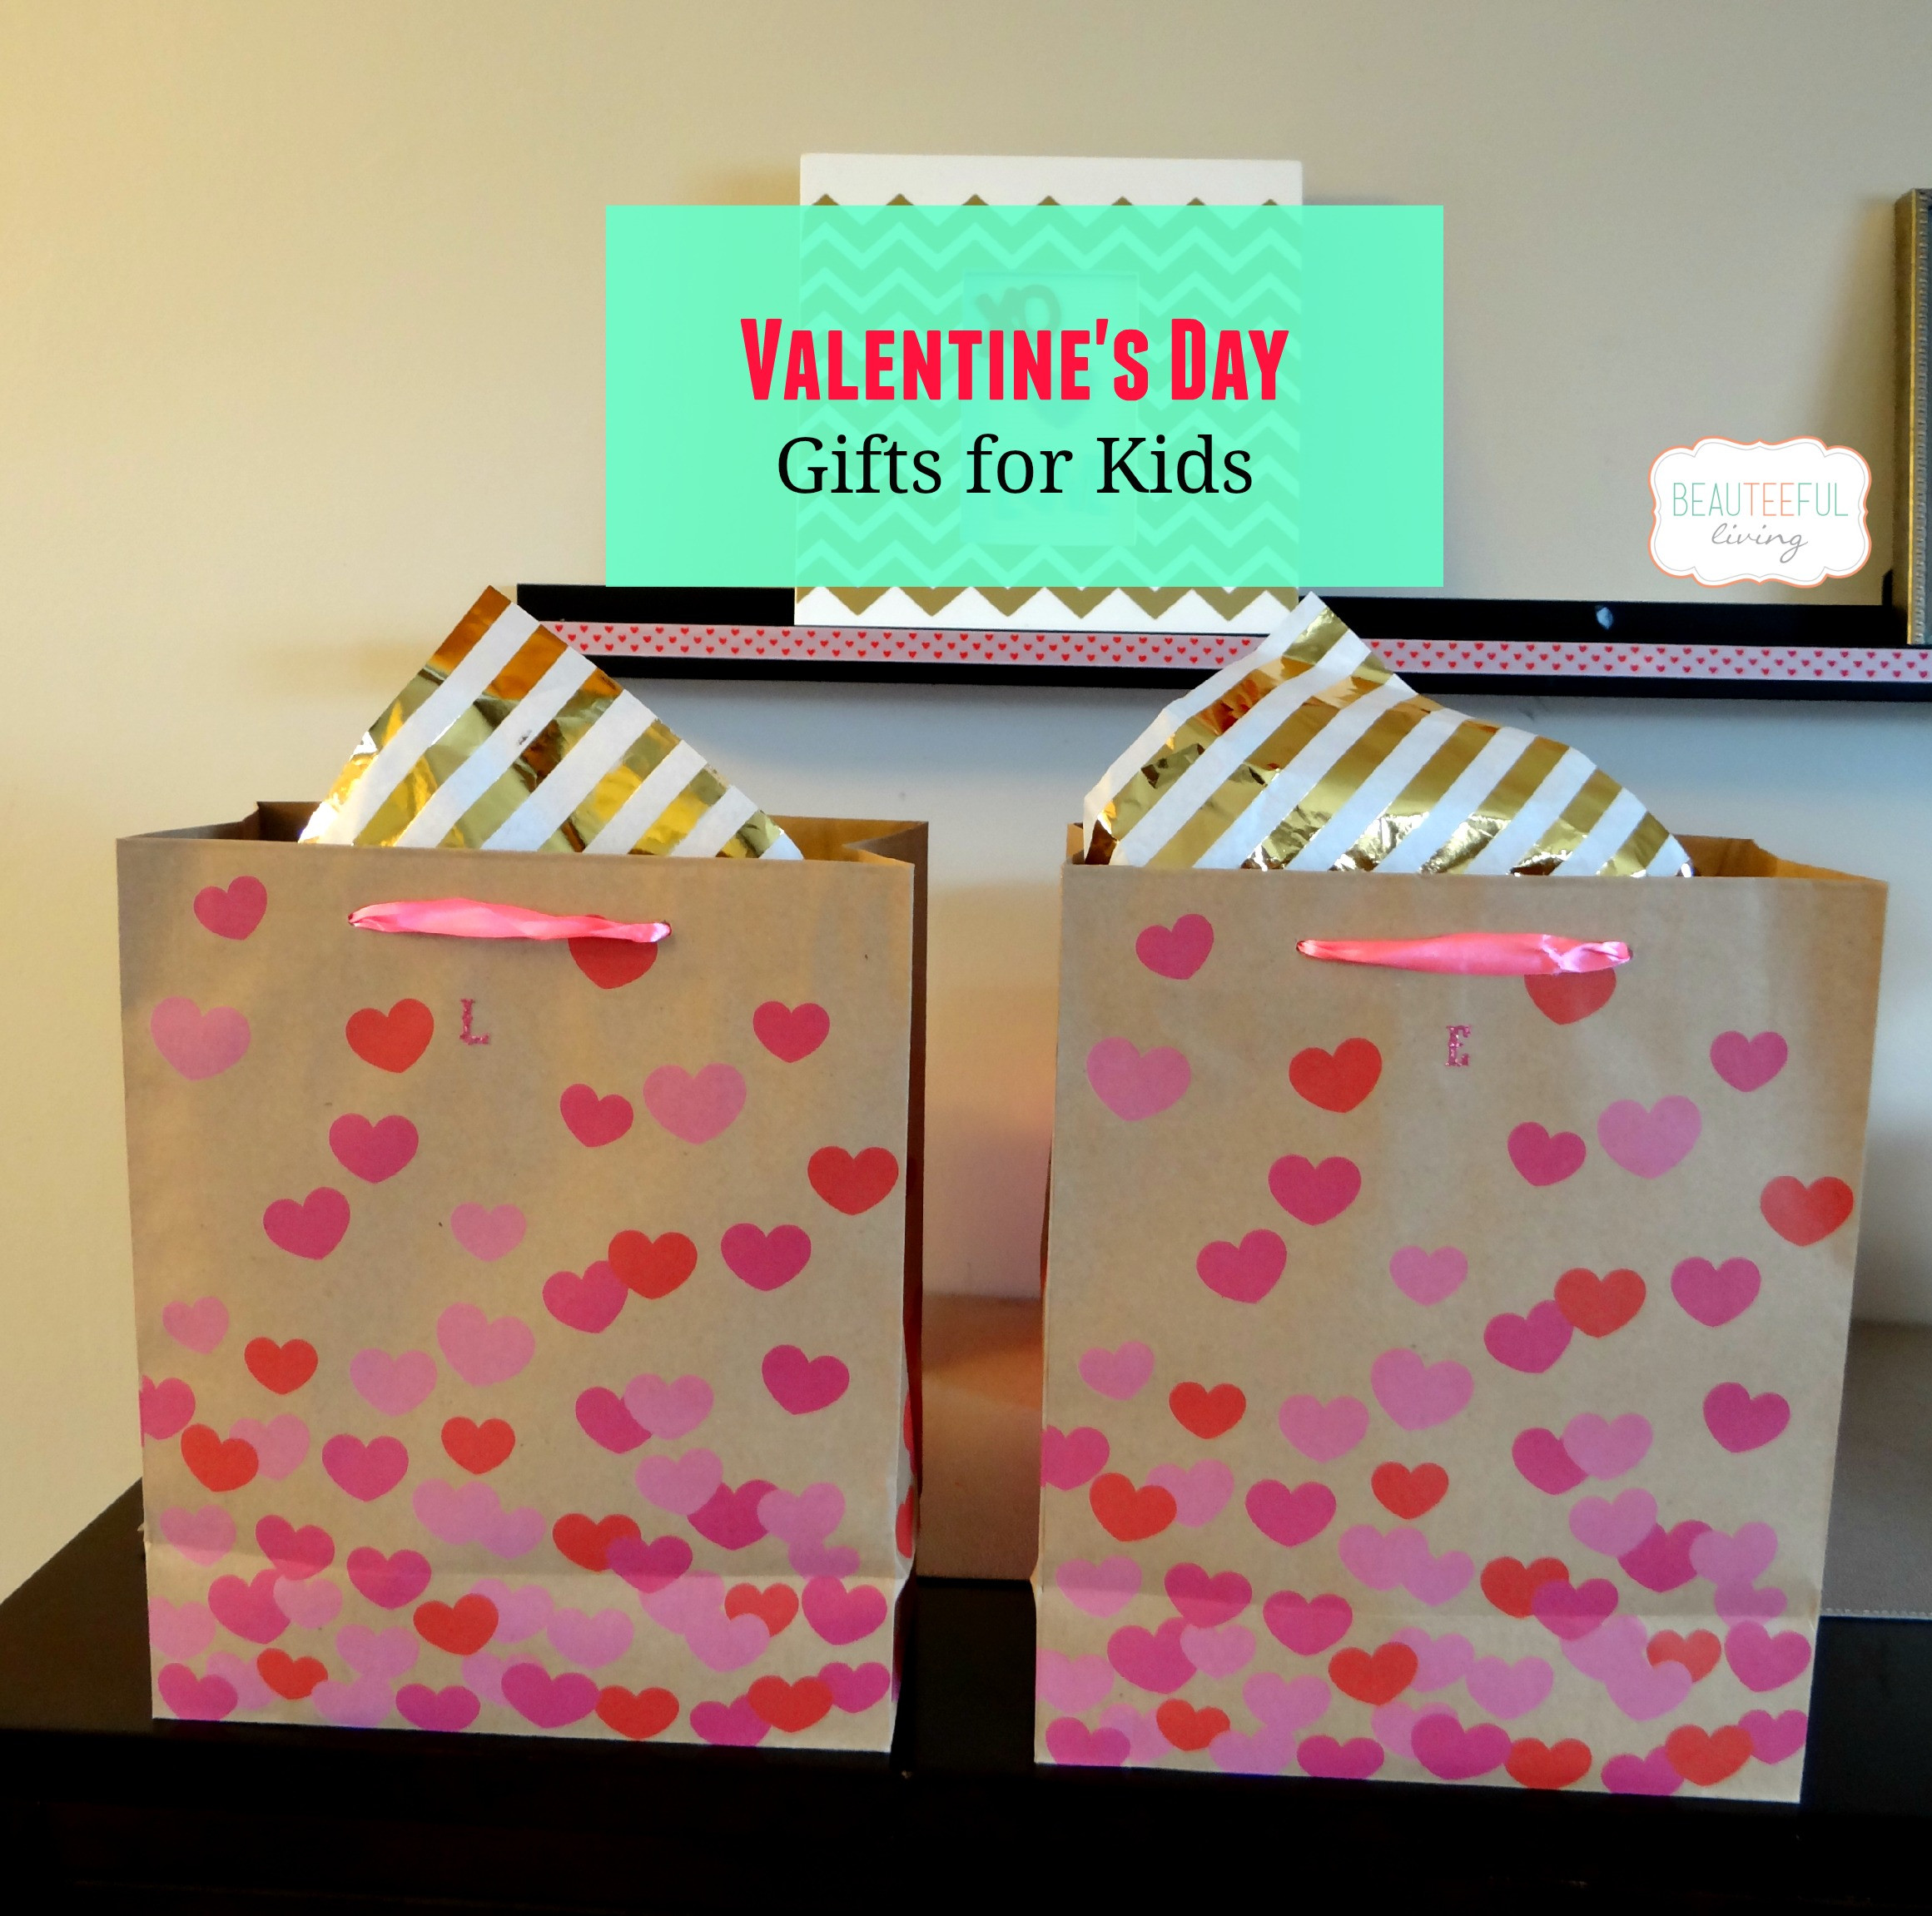 Valentine Day Gifts For Kids
 Valentine s Day Gifts for Kids BEAUTEEFUL Living